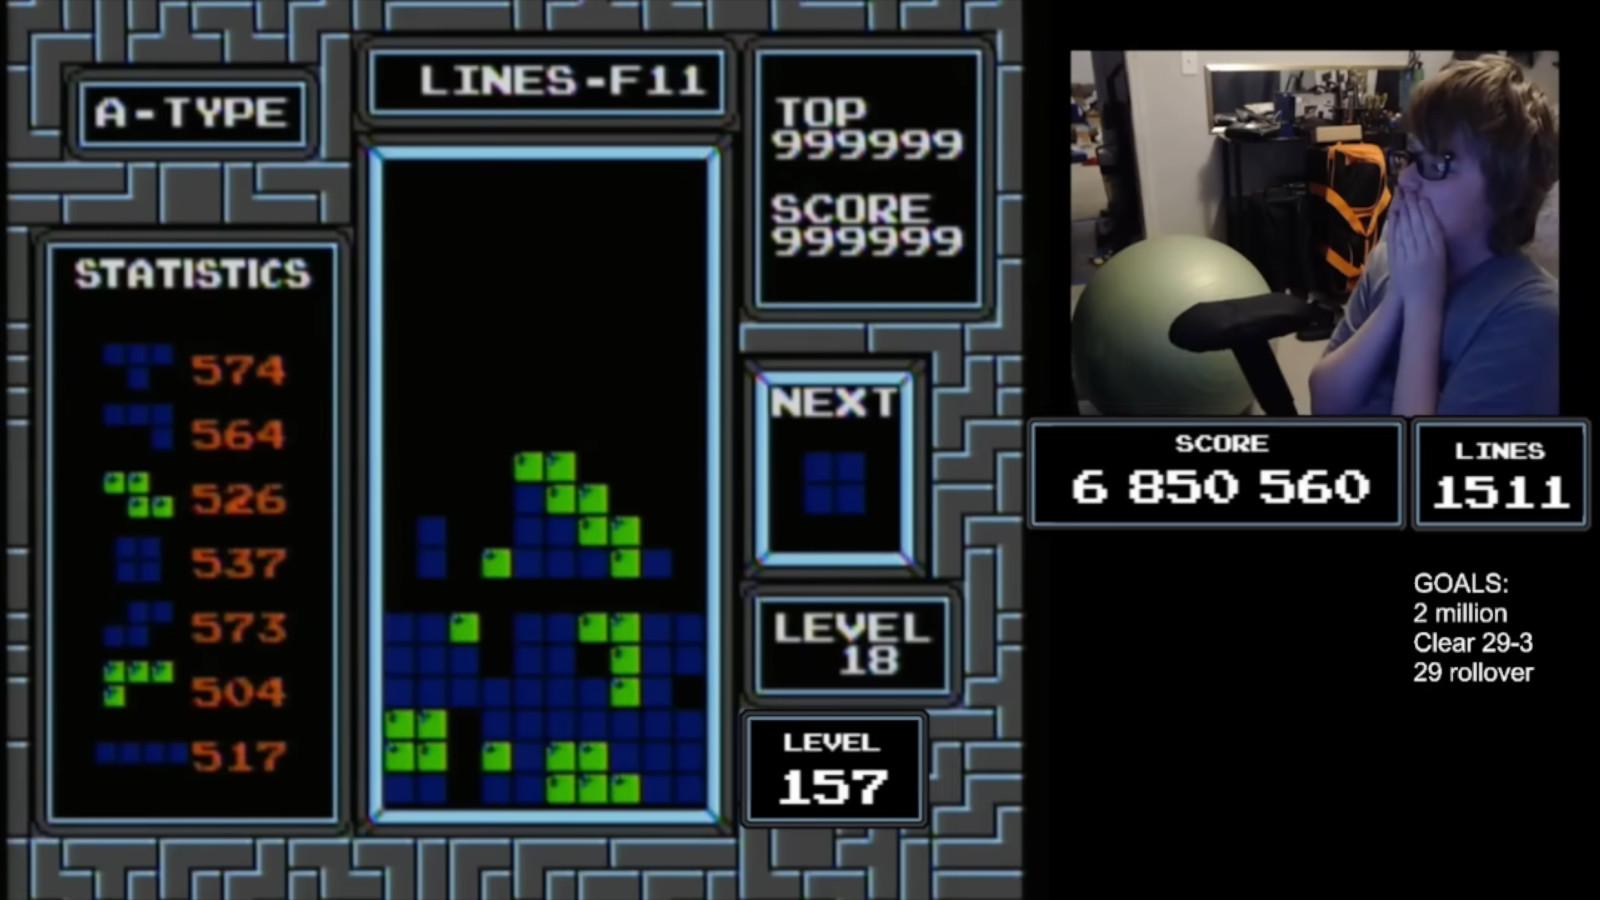 Blue Scuti breaks Tetris, effectively beating the game